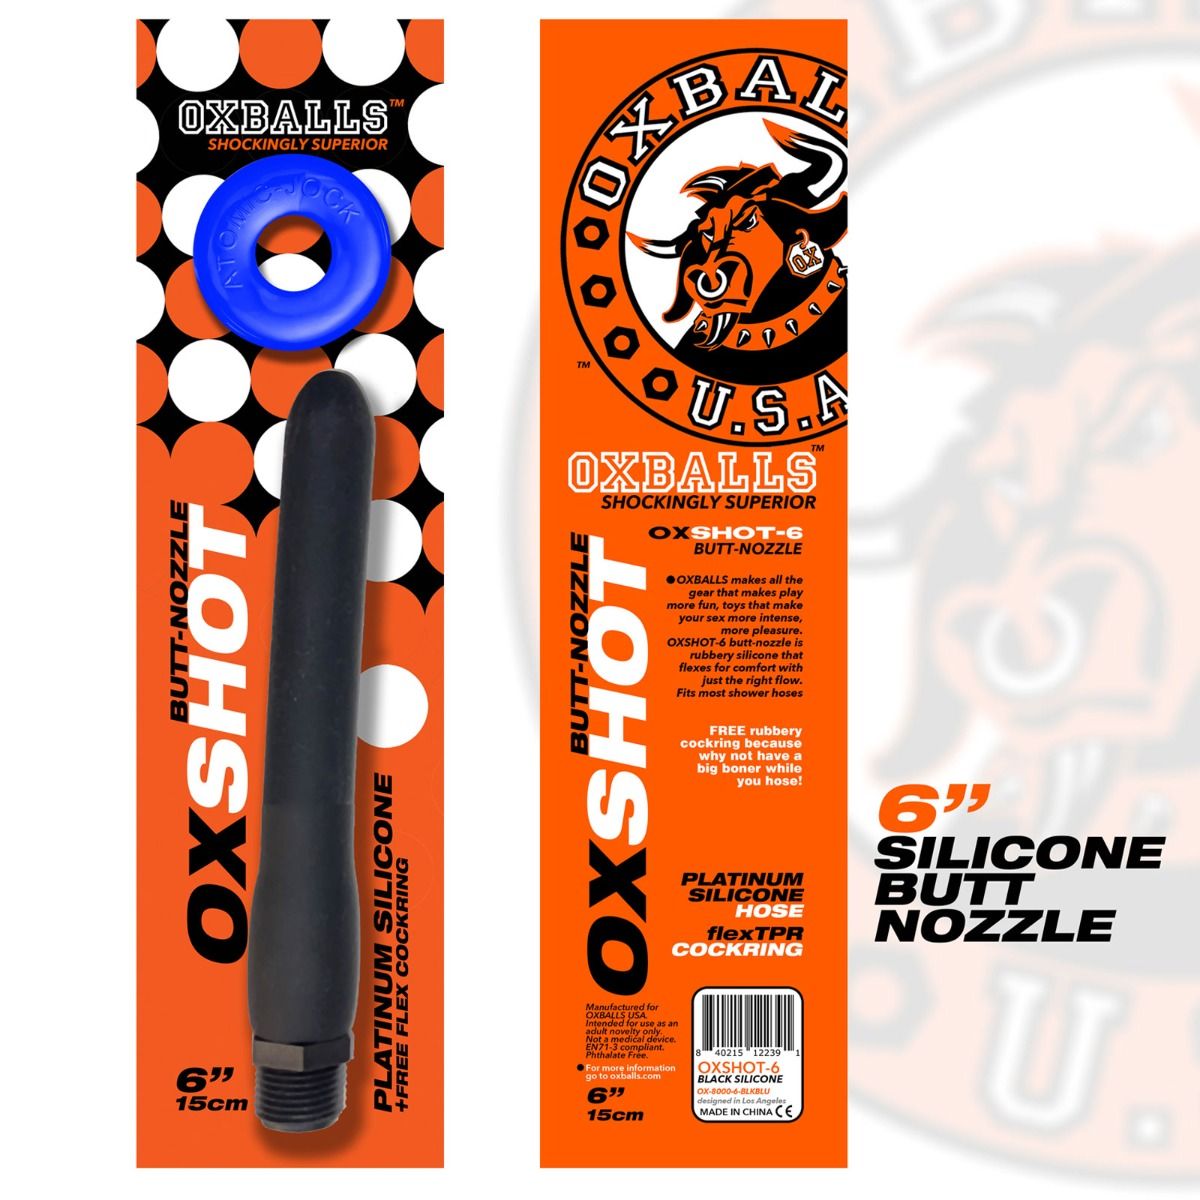 OXBALLS Oxshot Butt-Nozzle Shower Hose 6 Inch and Blue Atomic Jock Cockring